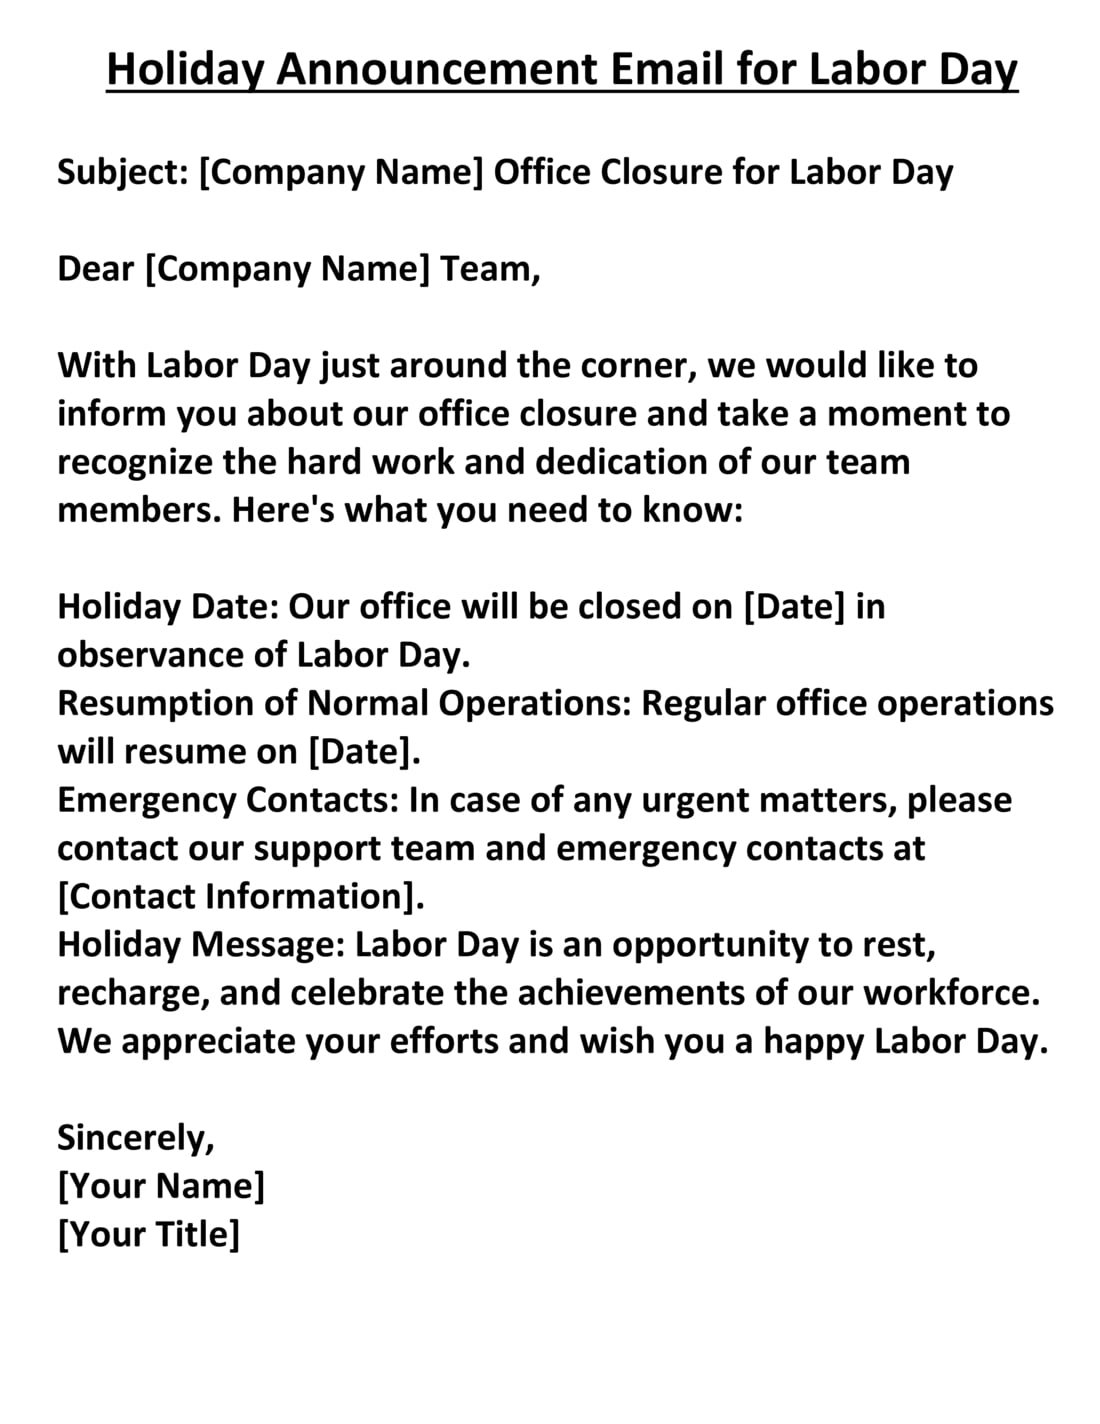 Holiday Announcement Email for Labor Day